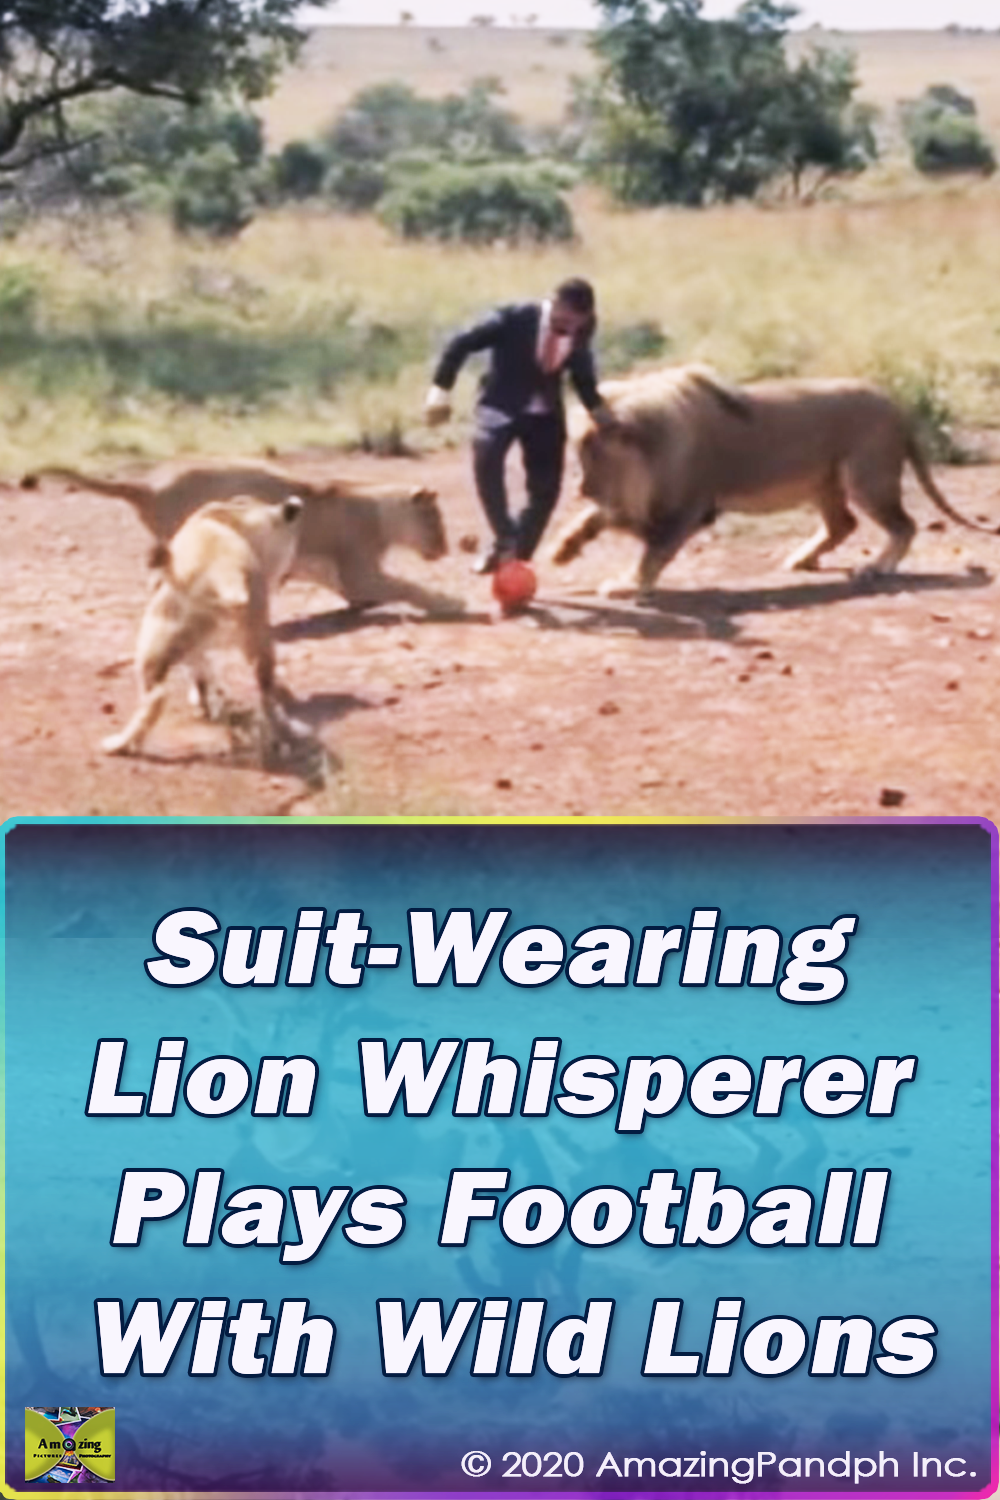 Suit-Wearing, Football, Wild Lion, Wild, Lion, Suit, amazing, trending, Forest, fashion, ad,